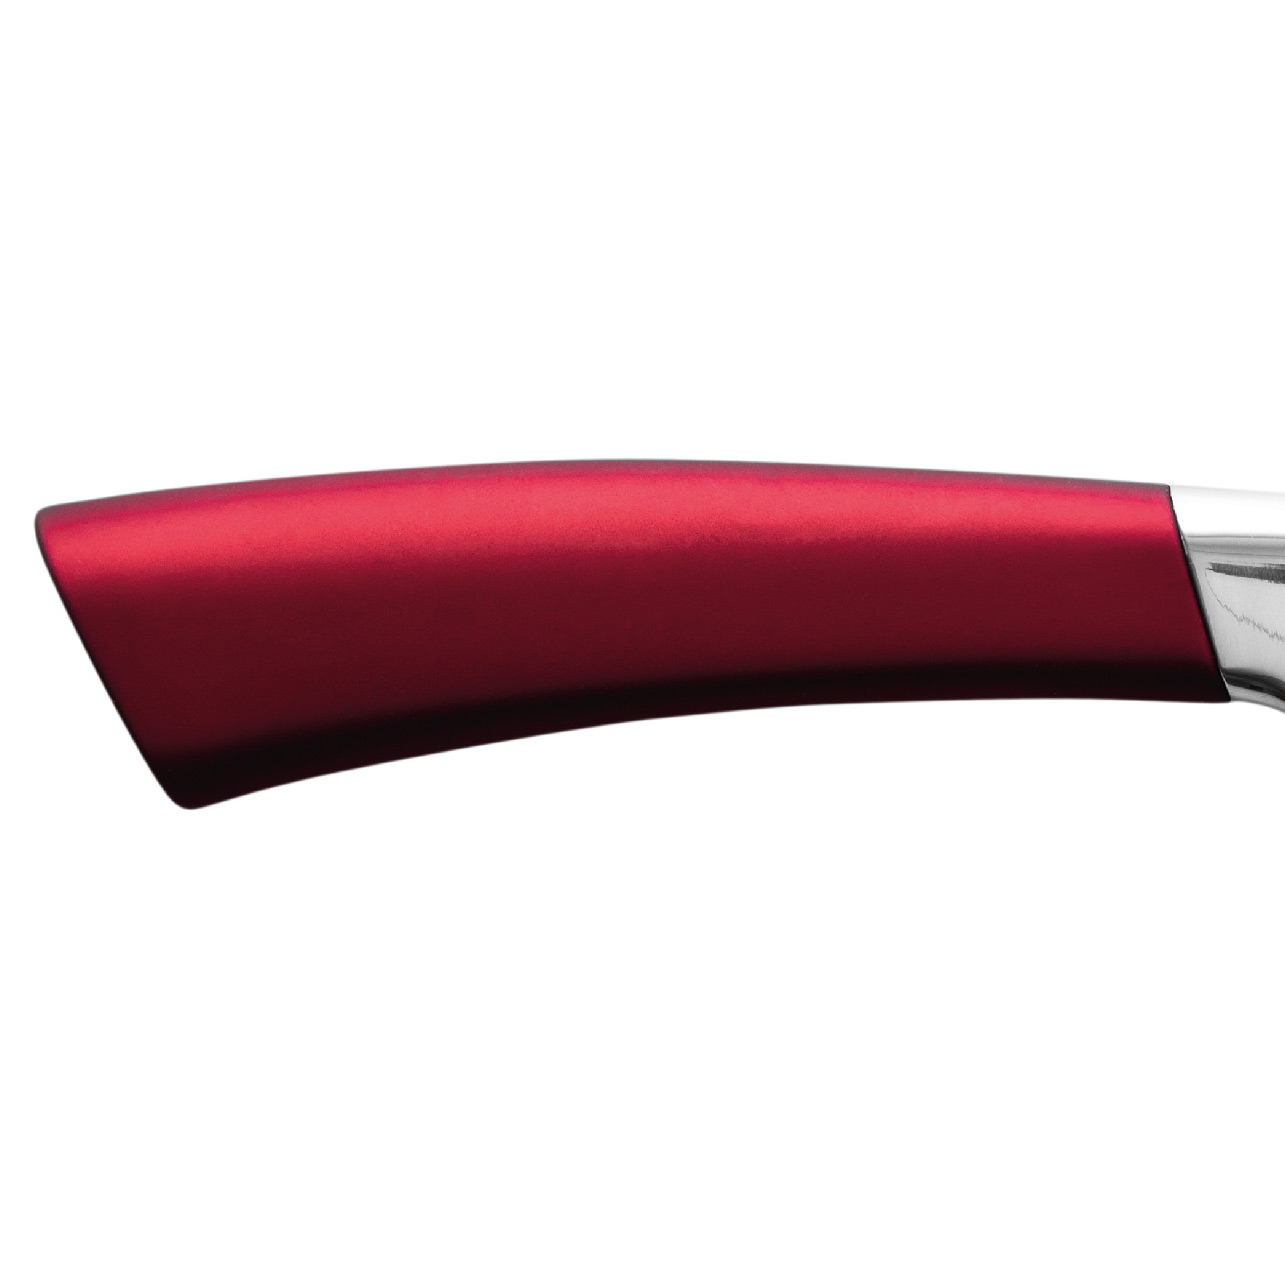 REEH ROUGE by CHROMA kleines Santoku 12 cm RR-06 Griff